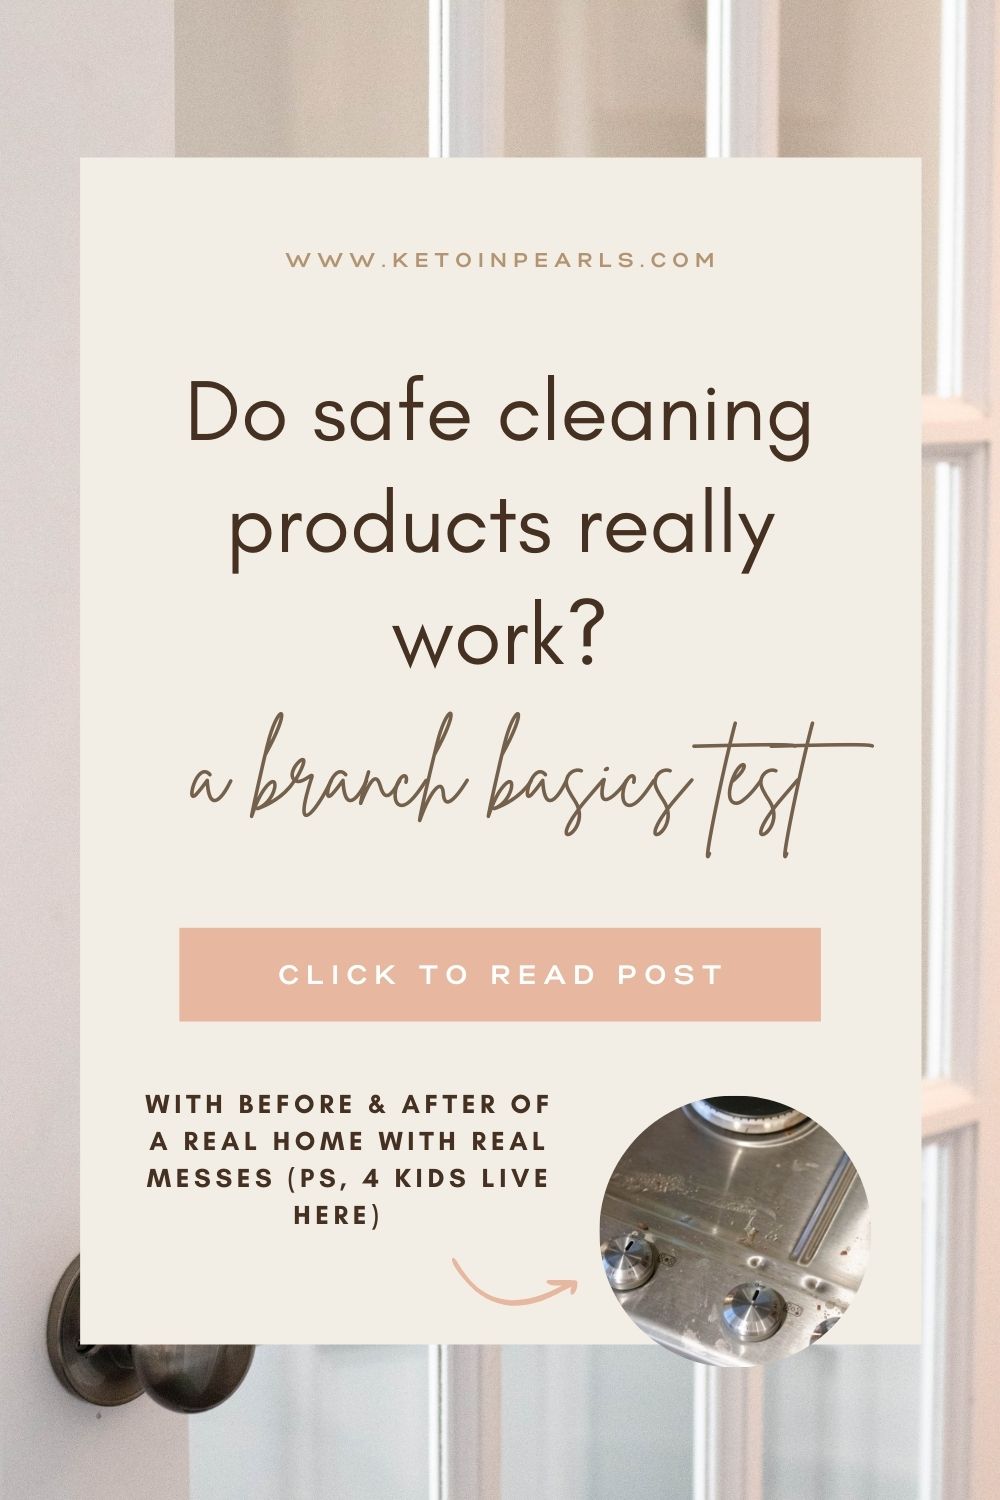 This post will give a high level overview of the difference between non toxic, natural, and safe cleaning products as well as give an honest review of Branch Basics cleaning products. If you're ready to switch to an eco-friendly home, this post is for you!